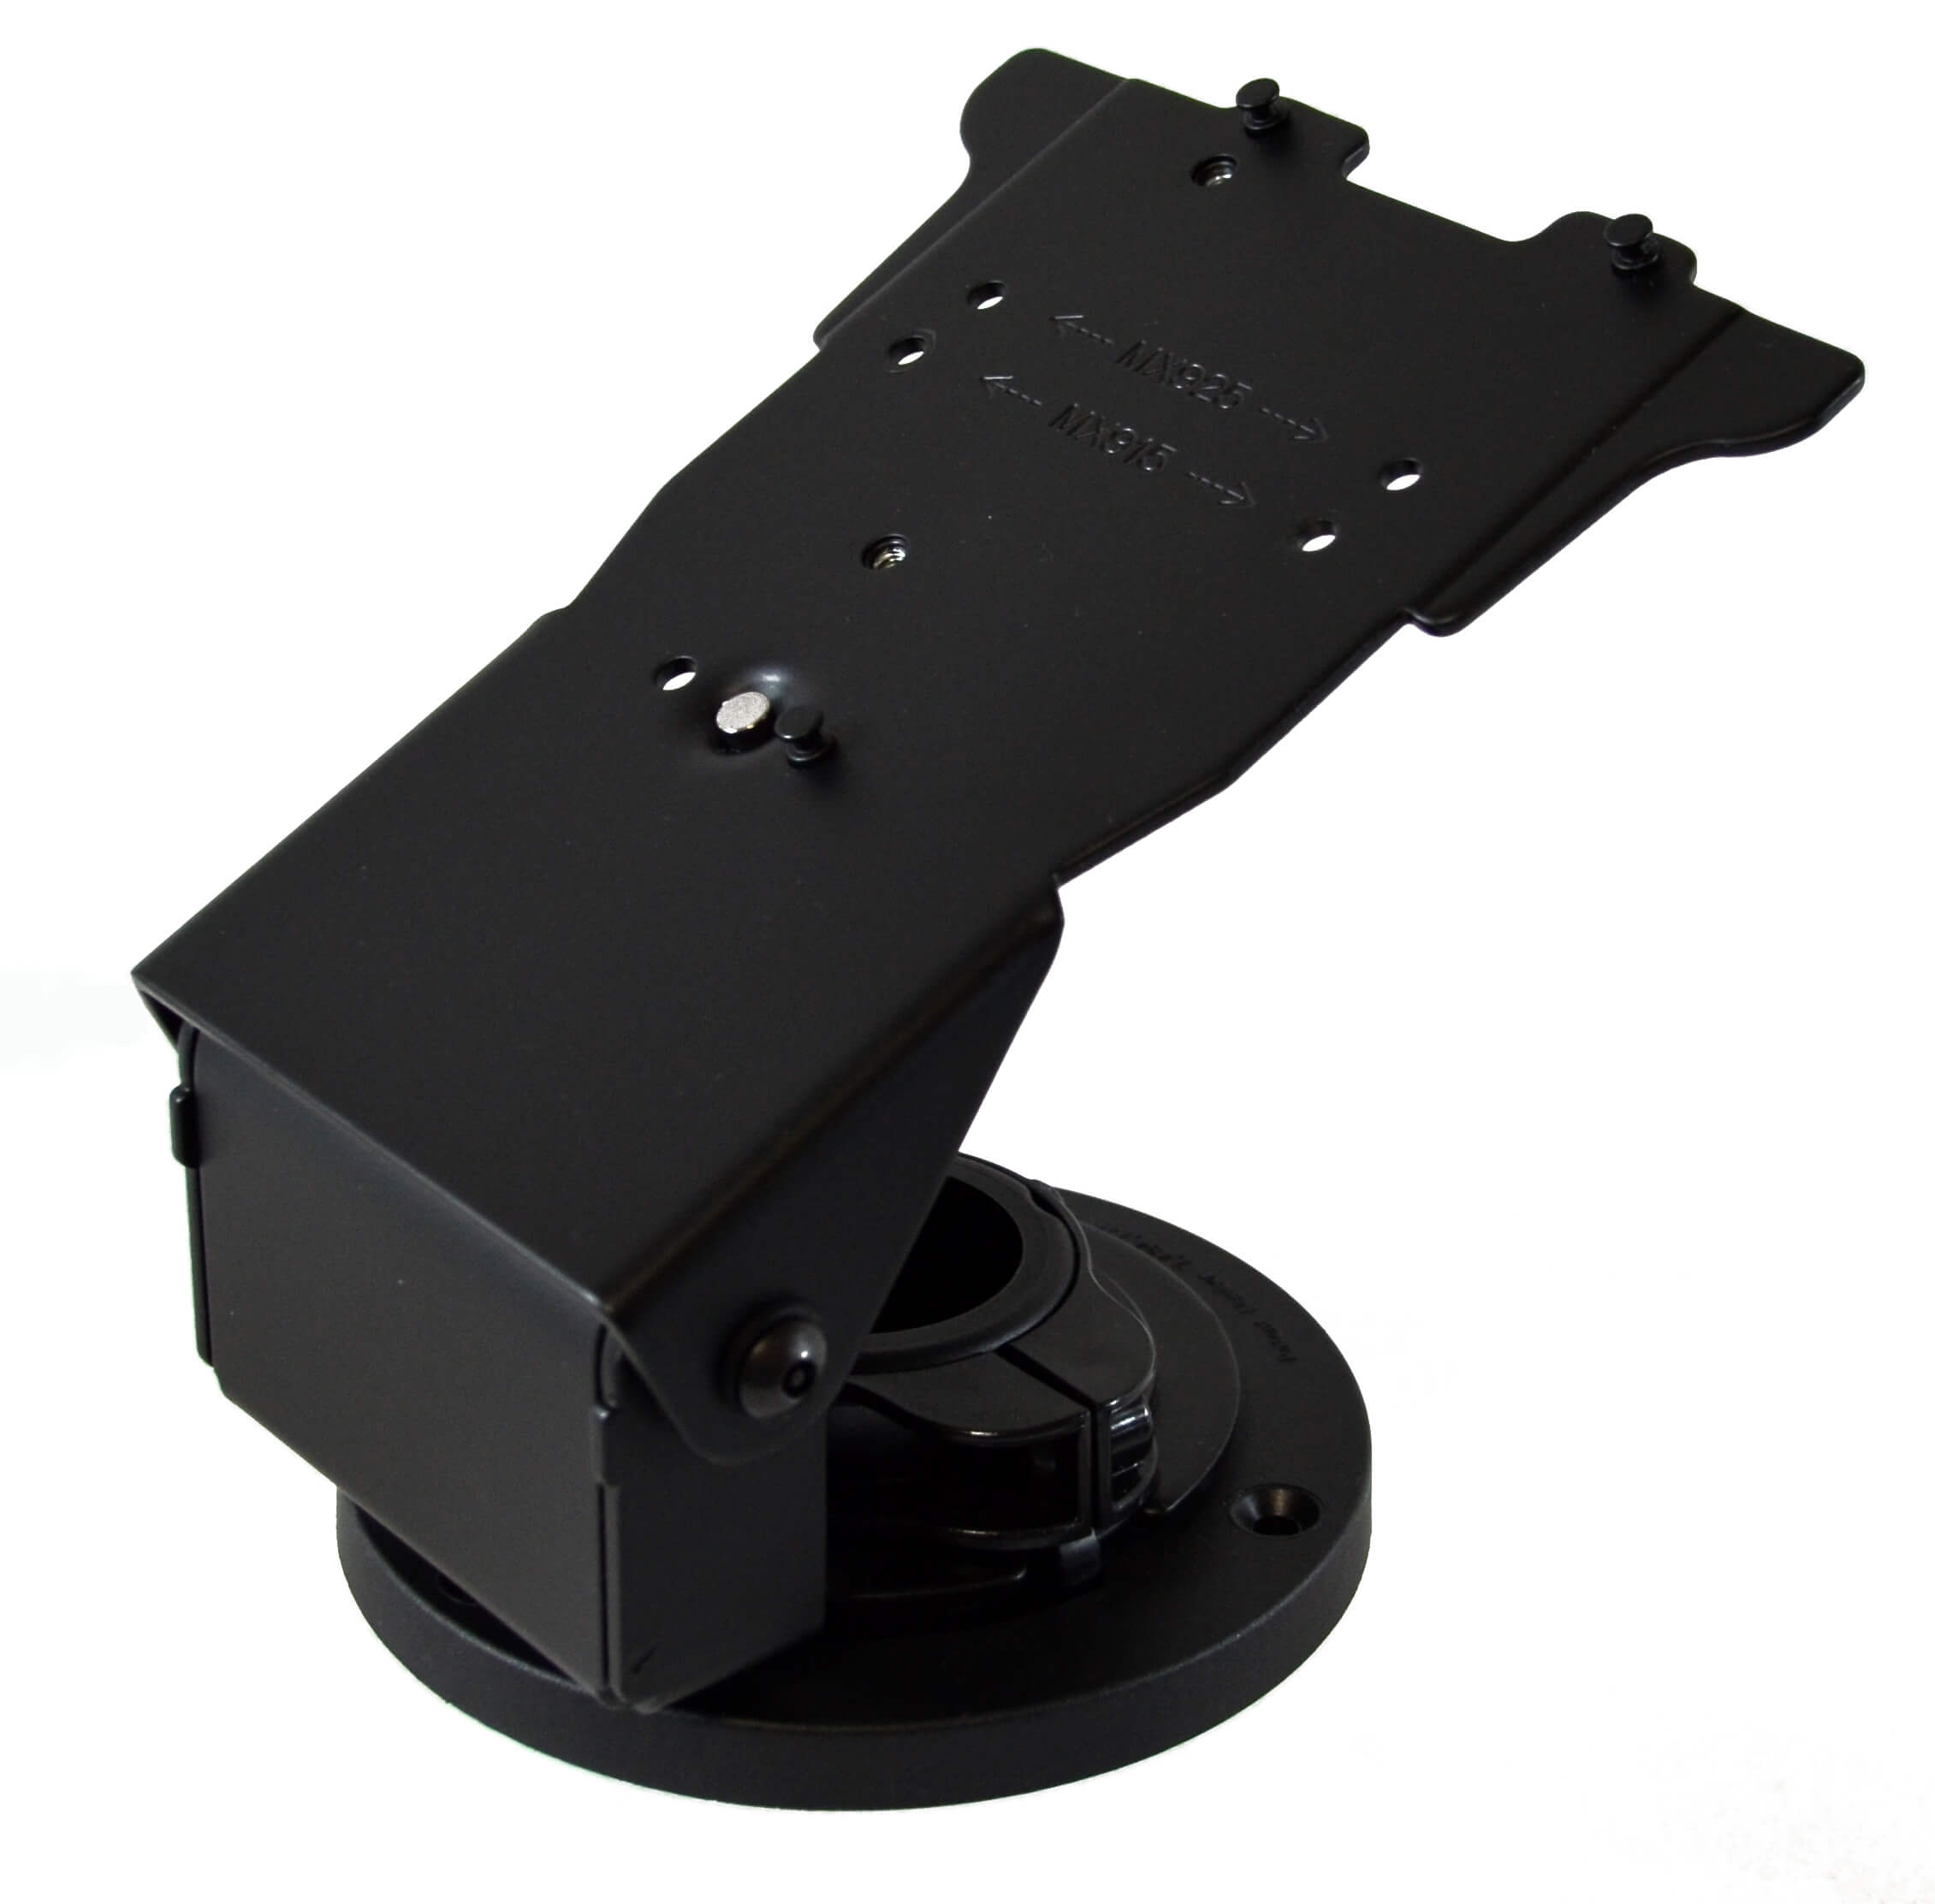 Round Base Metal Stand for Verifone MX915/MX925/M424/M425 Payment Terminals